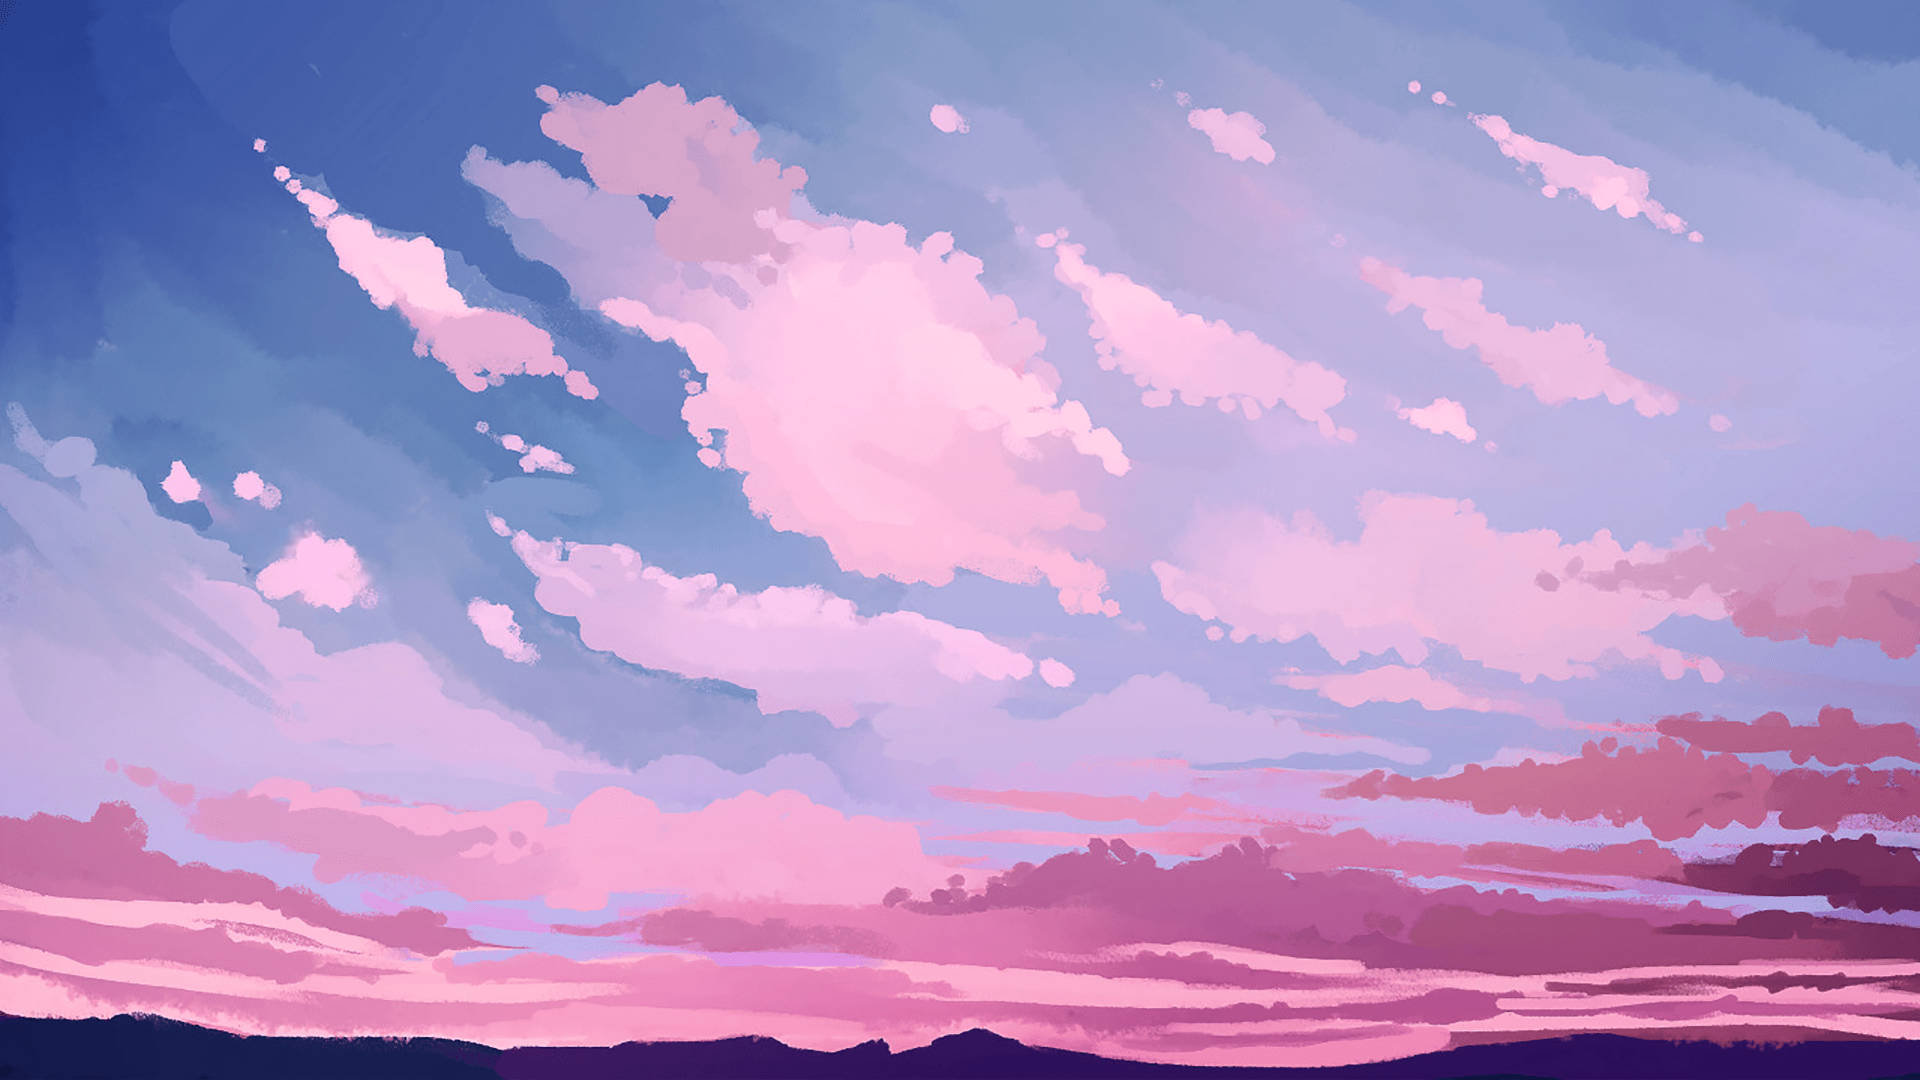 Download Illustrated Pink And Blue Sky Wallpaper